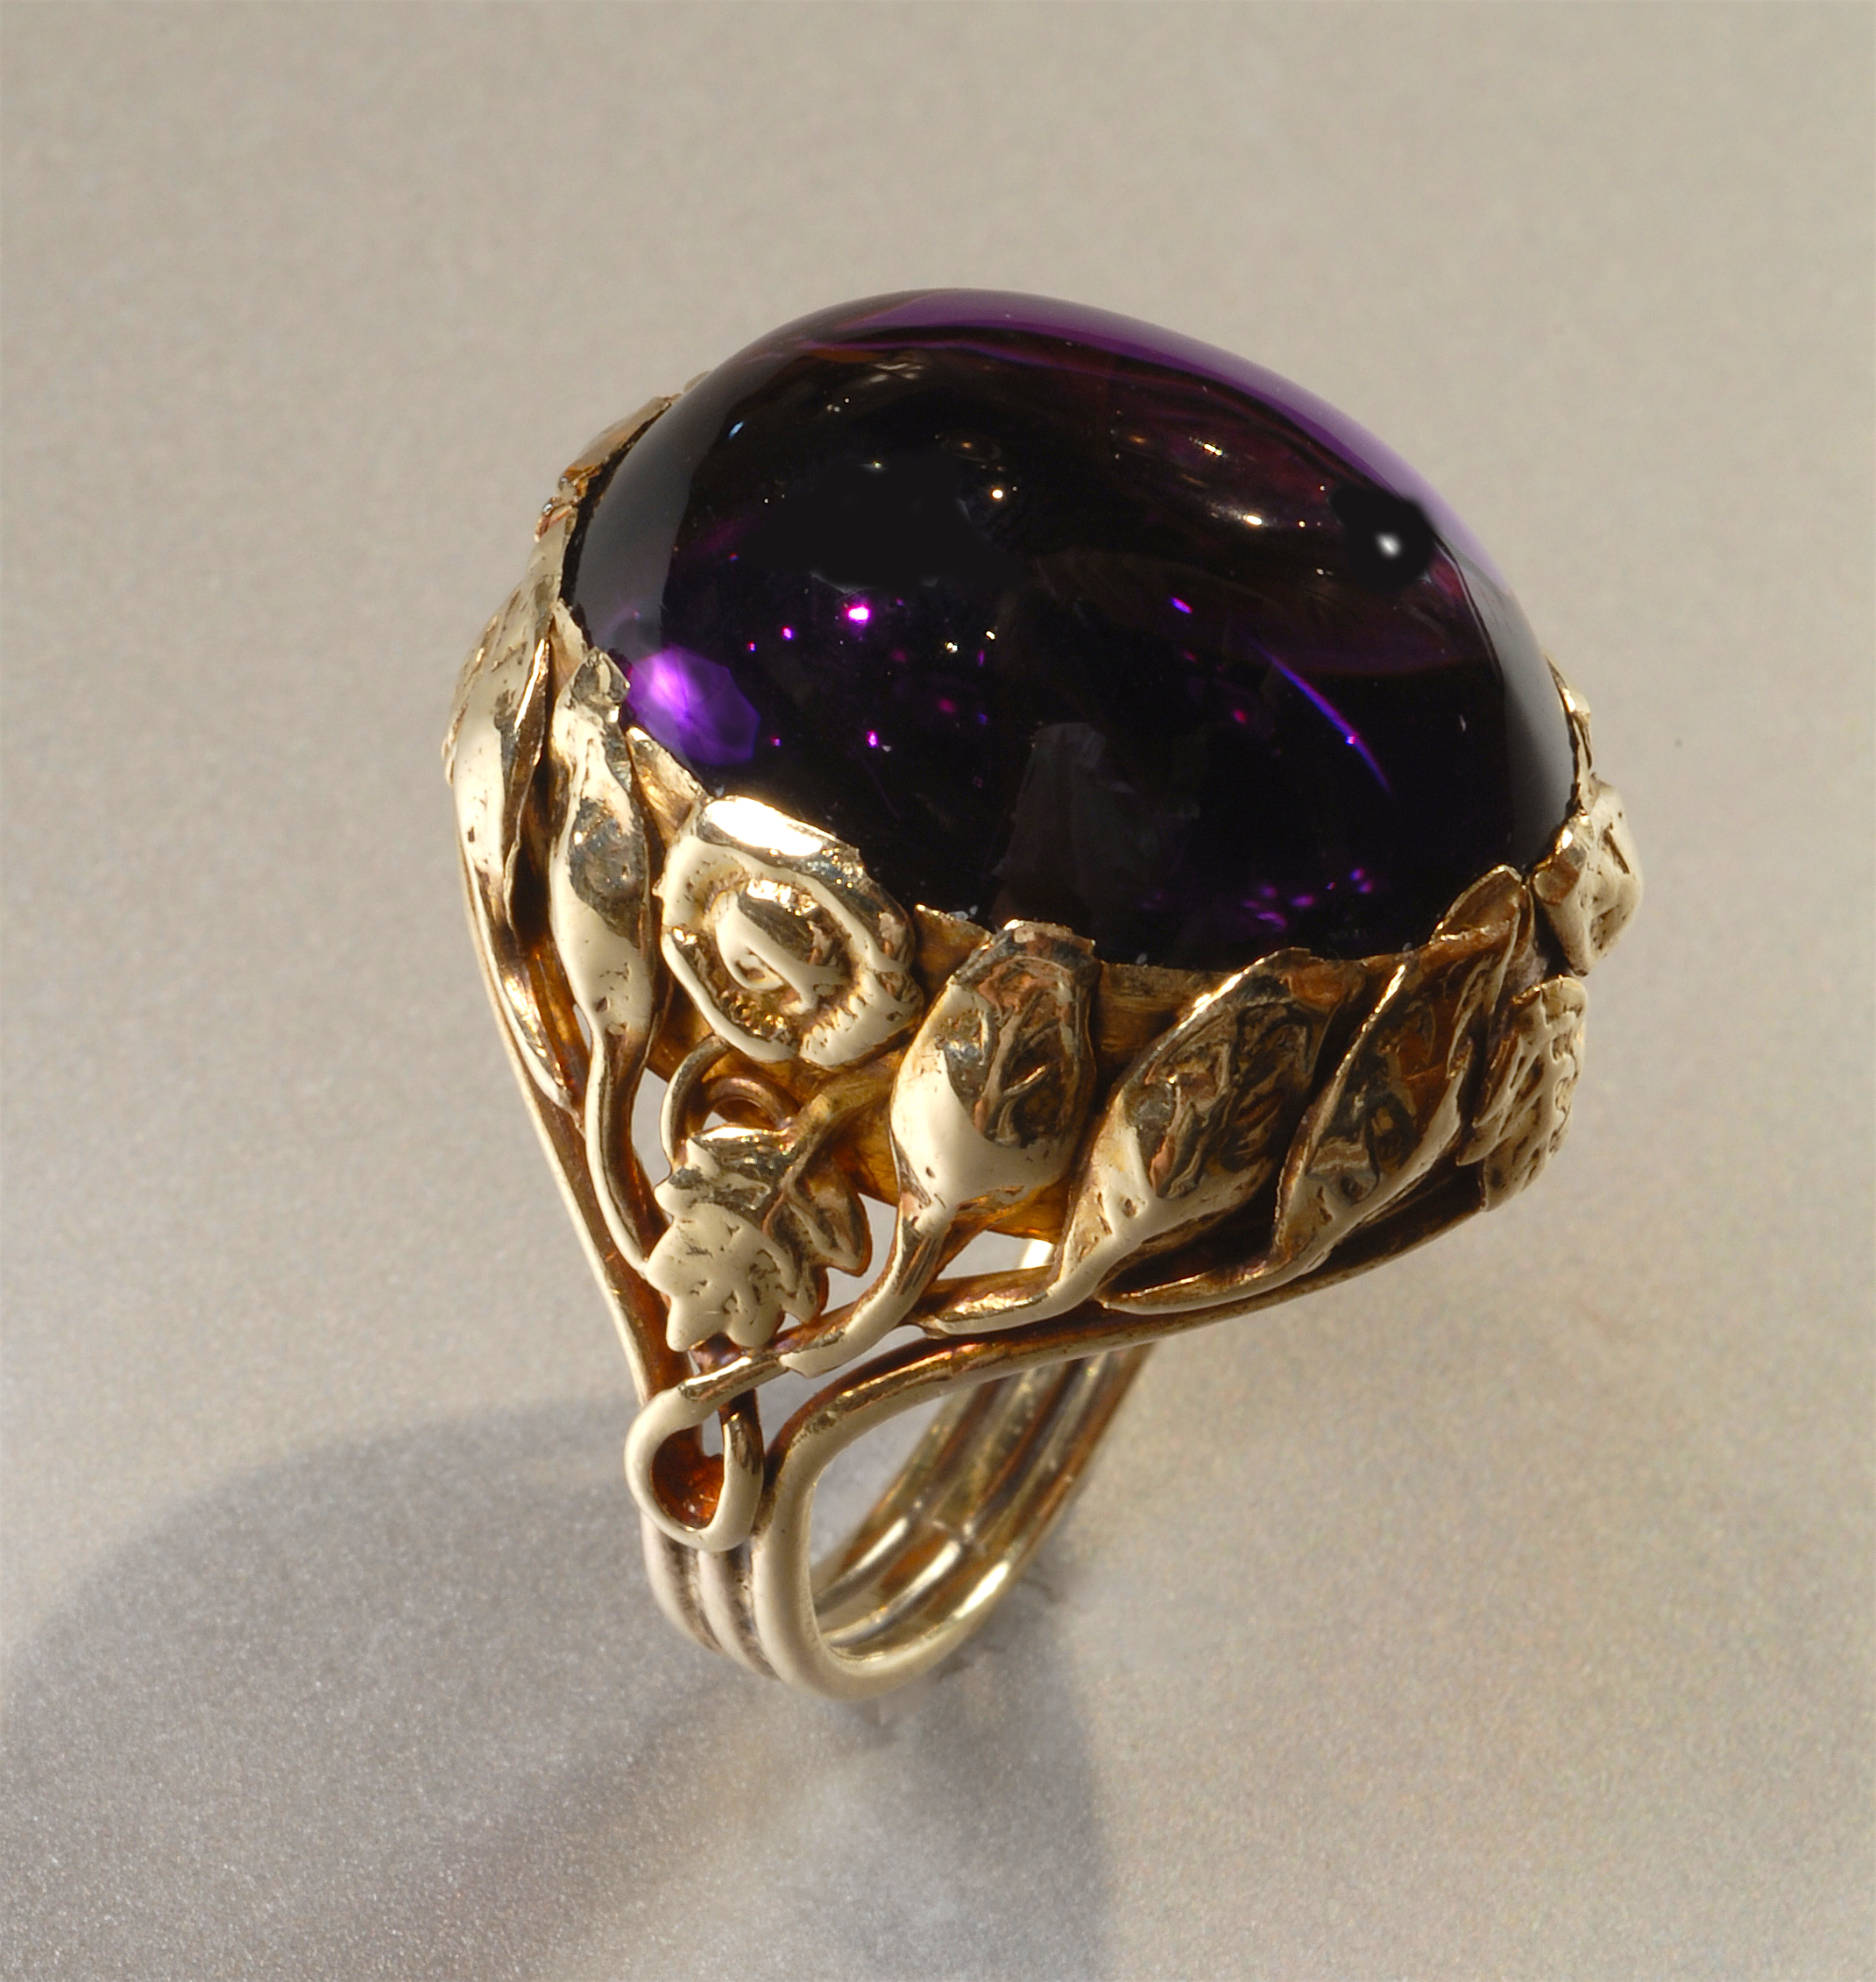 American Arts & Crafts ring, detailed and scrolling 14K gold mount with stylized leaves and blossoms surrounding a large cabochon amethyst (approx. 22+ carats TW), marked, c. 1915